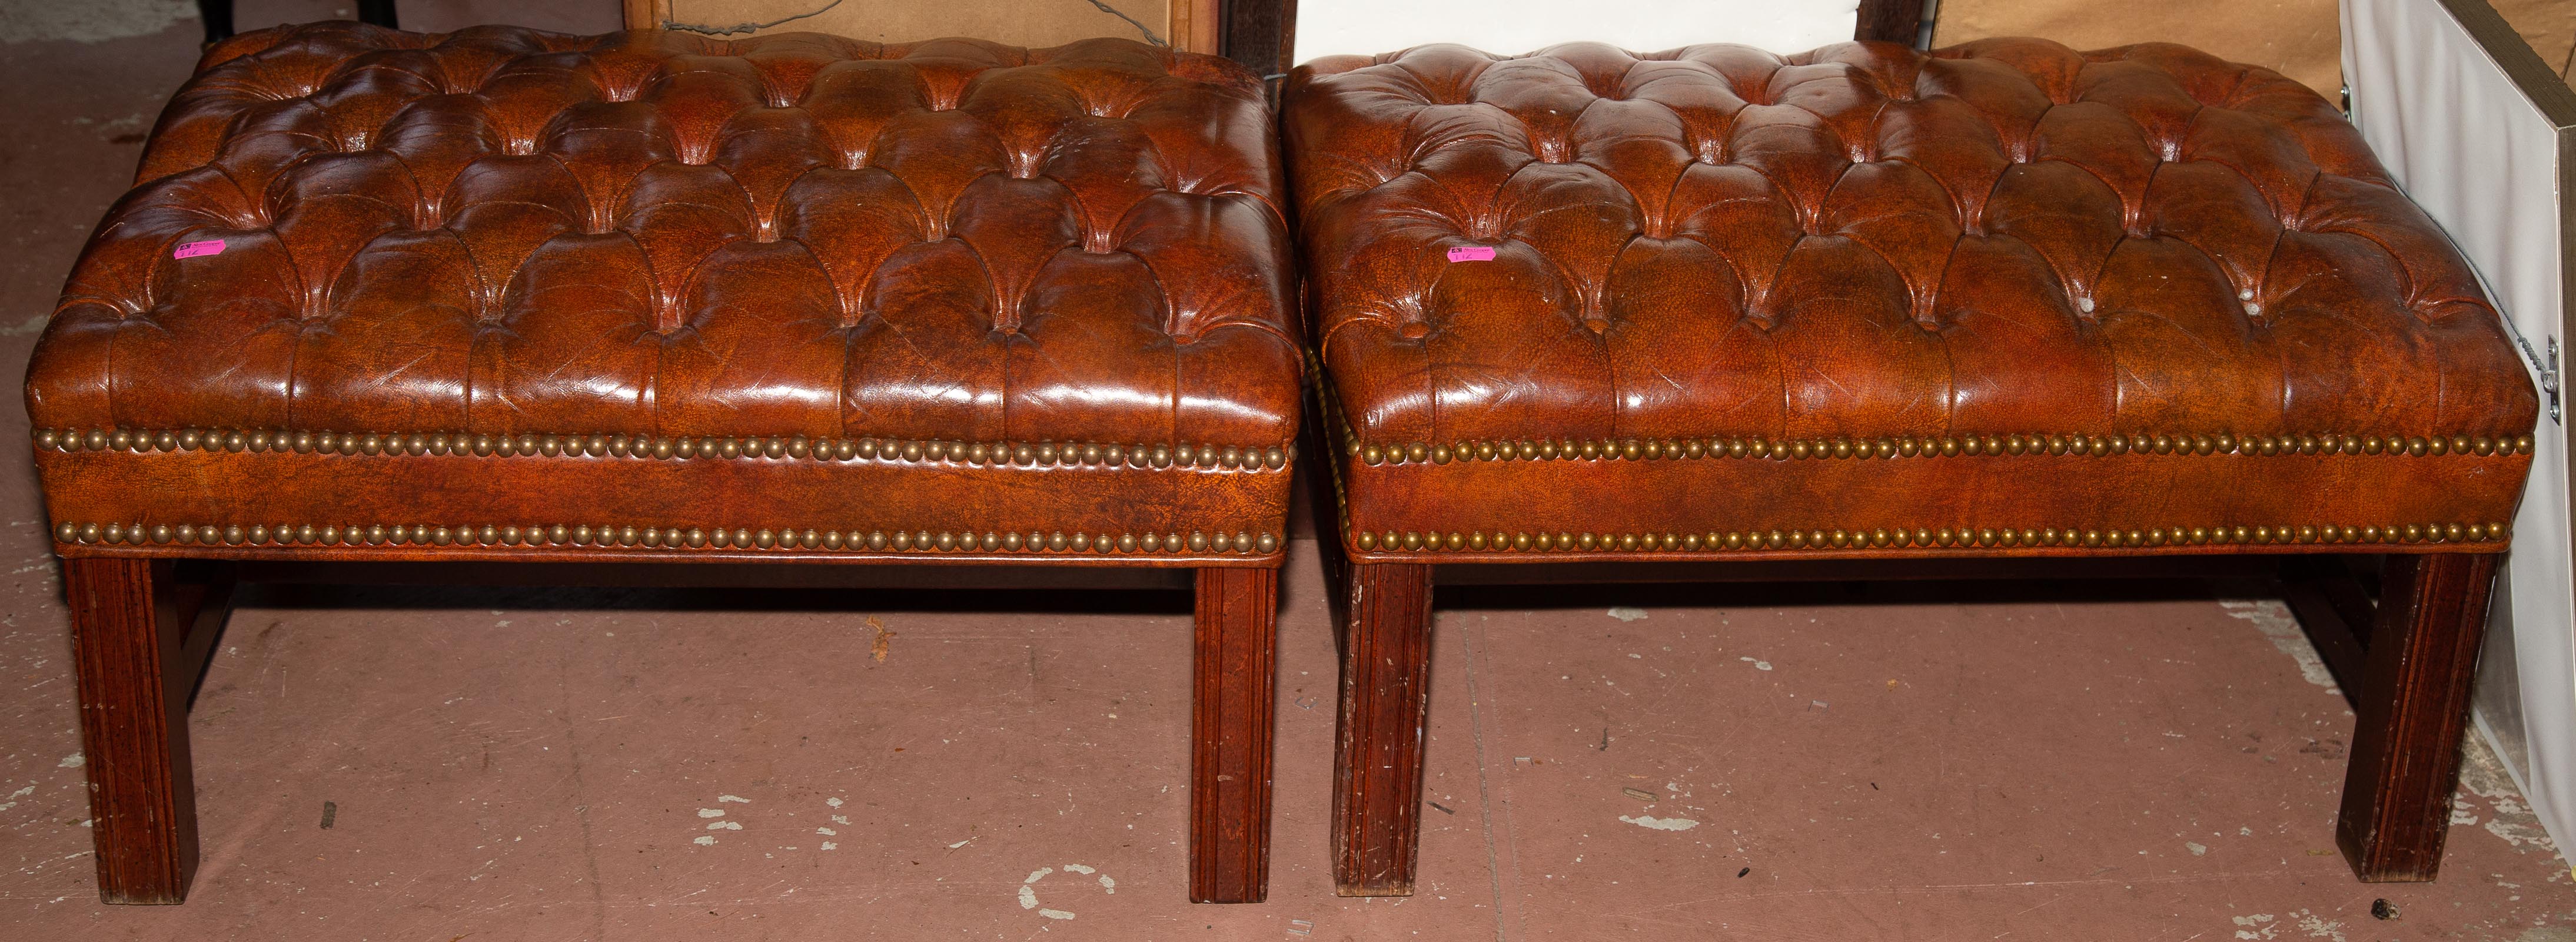 TWO FAUX LEATHER OTTOMANS *located